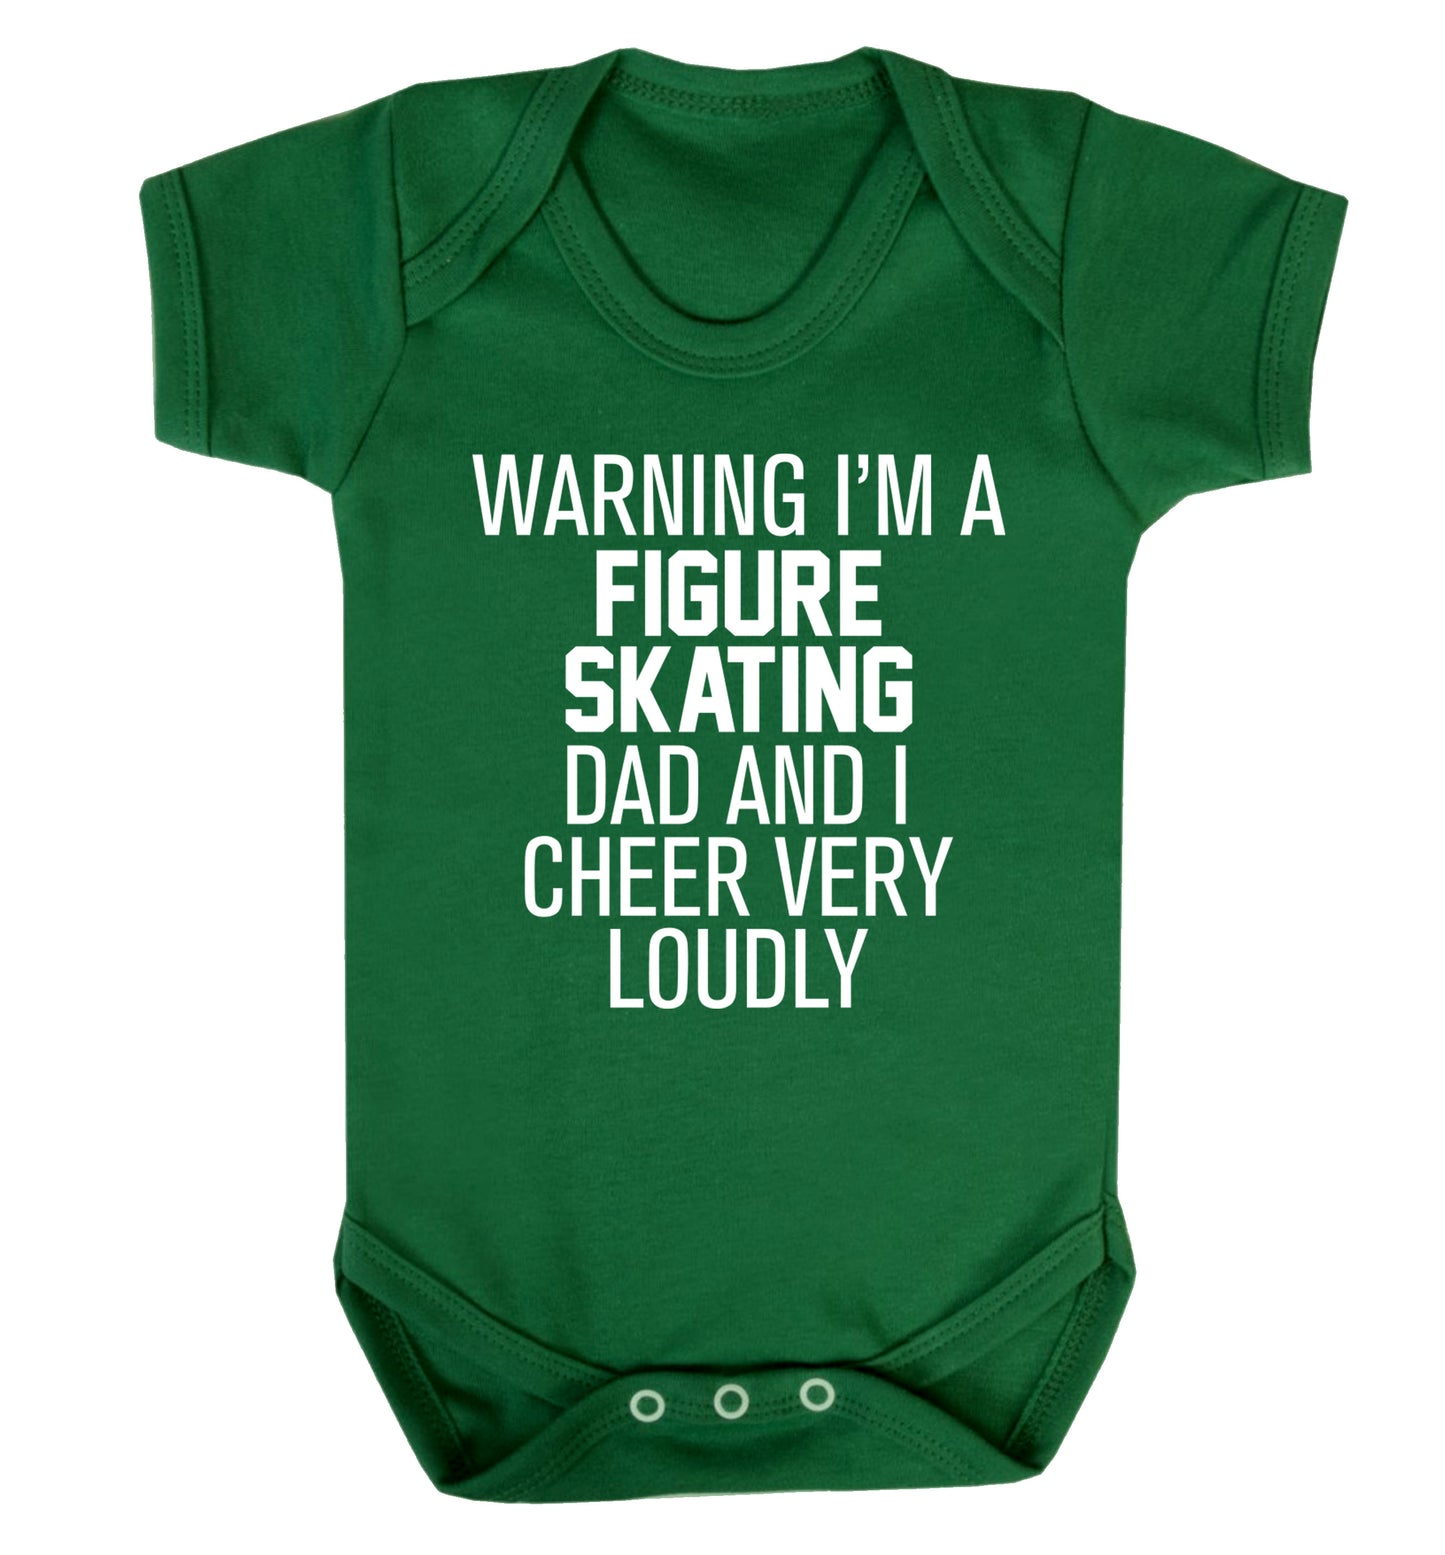 Warning I'm a figure skating dad and I cheer very loudly Baby Vest green 18-24 months